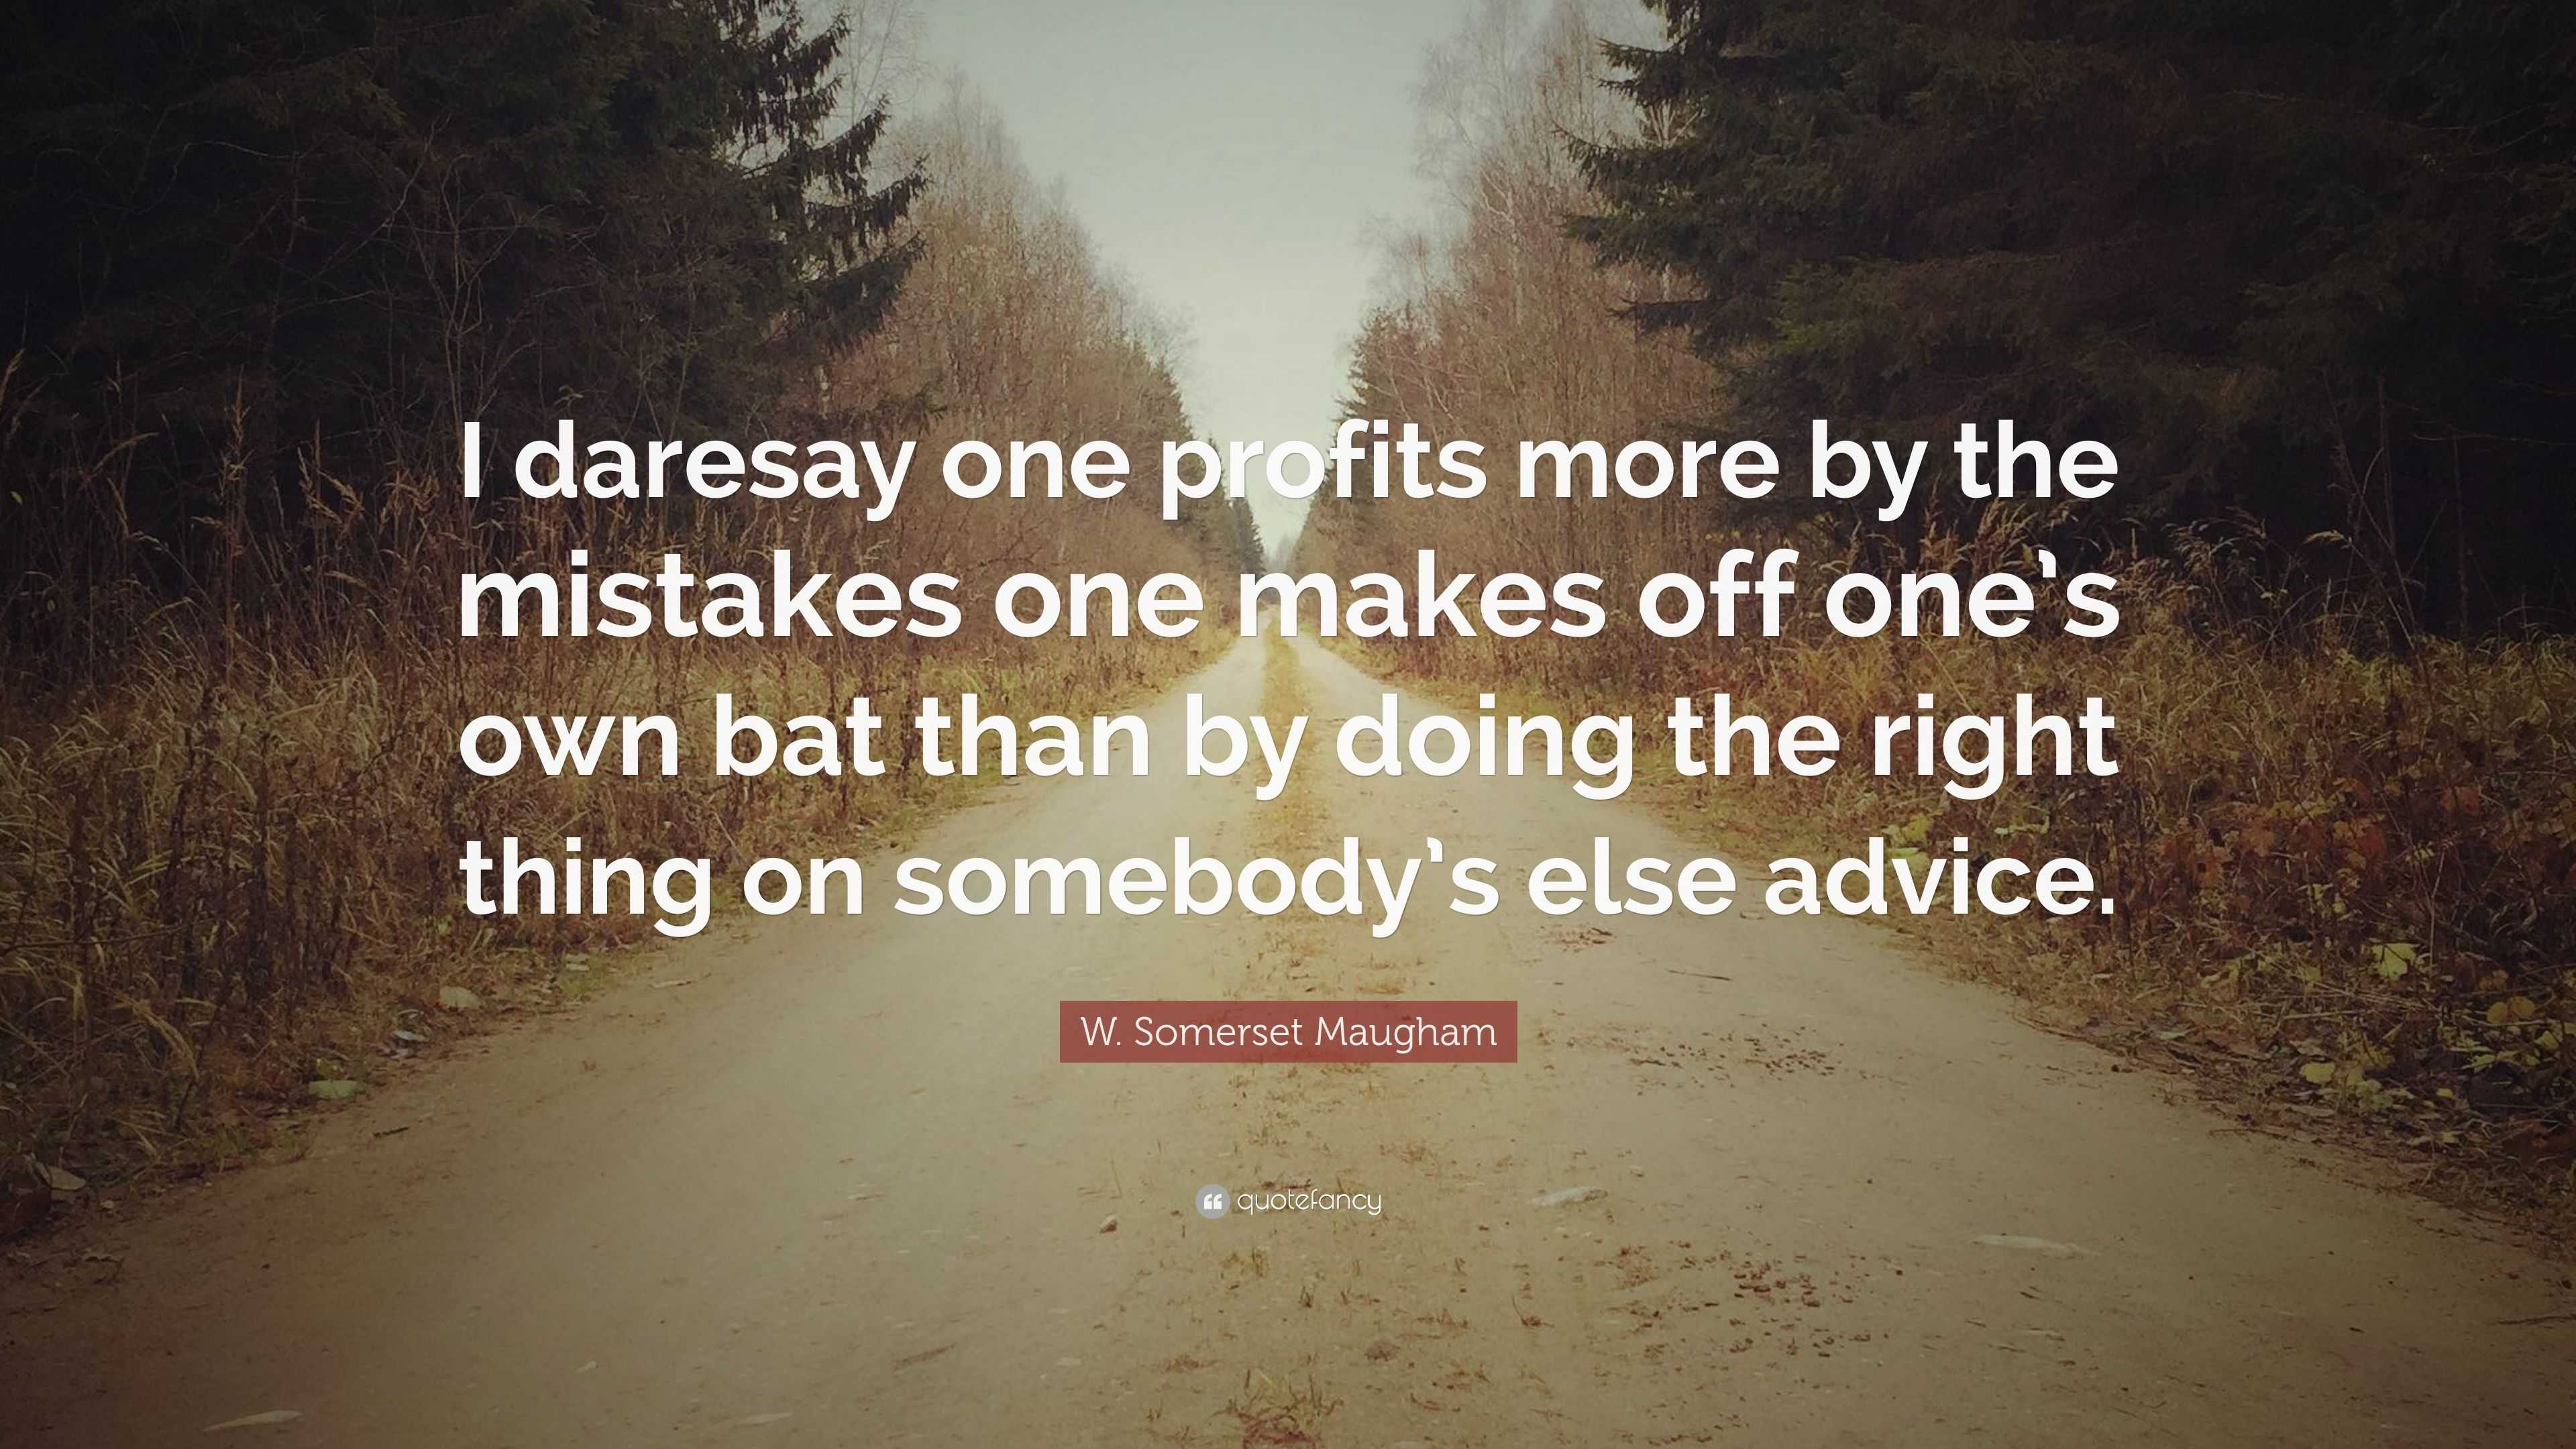 W. Somerset Maugham Quote: “I daresay one profits more by the mistakes ...